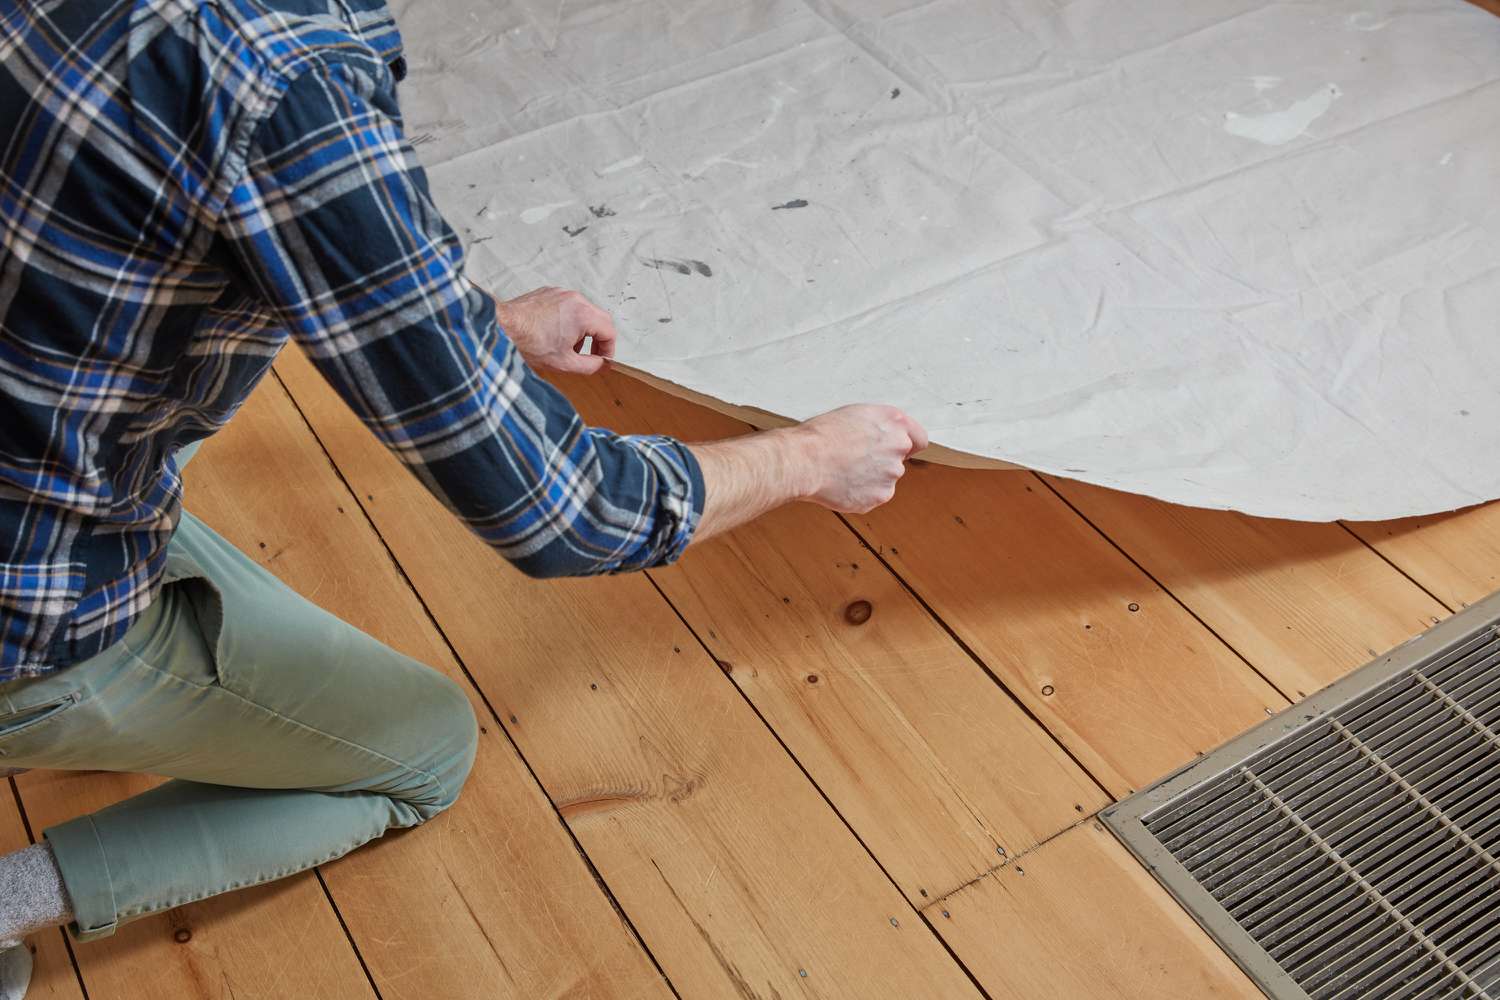 Drop cloth placed over wood floor for protection